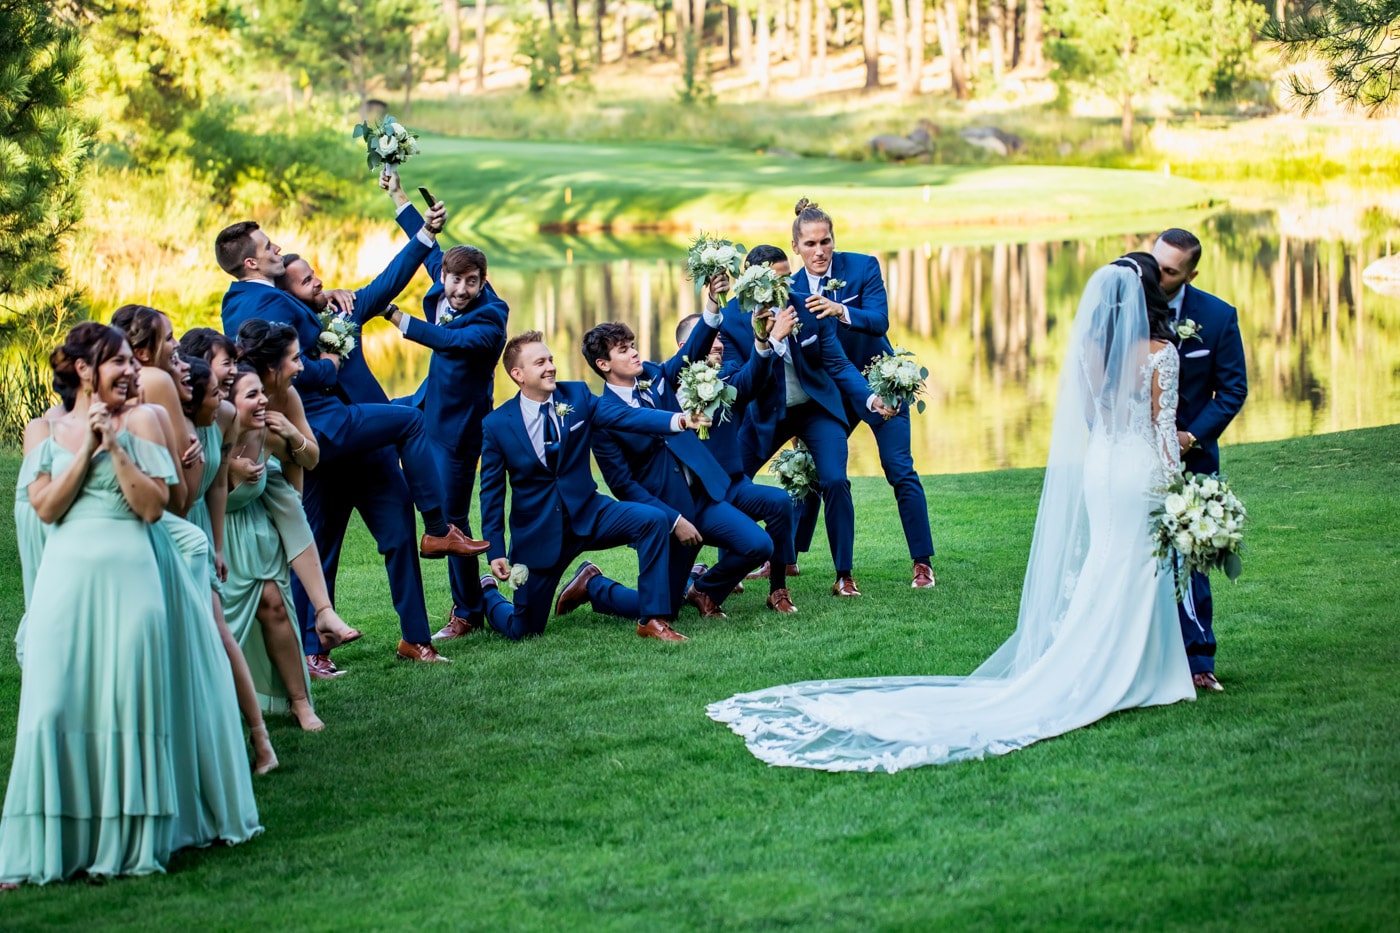 Bride and groom kiss with wedding party in funny poses behind